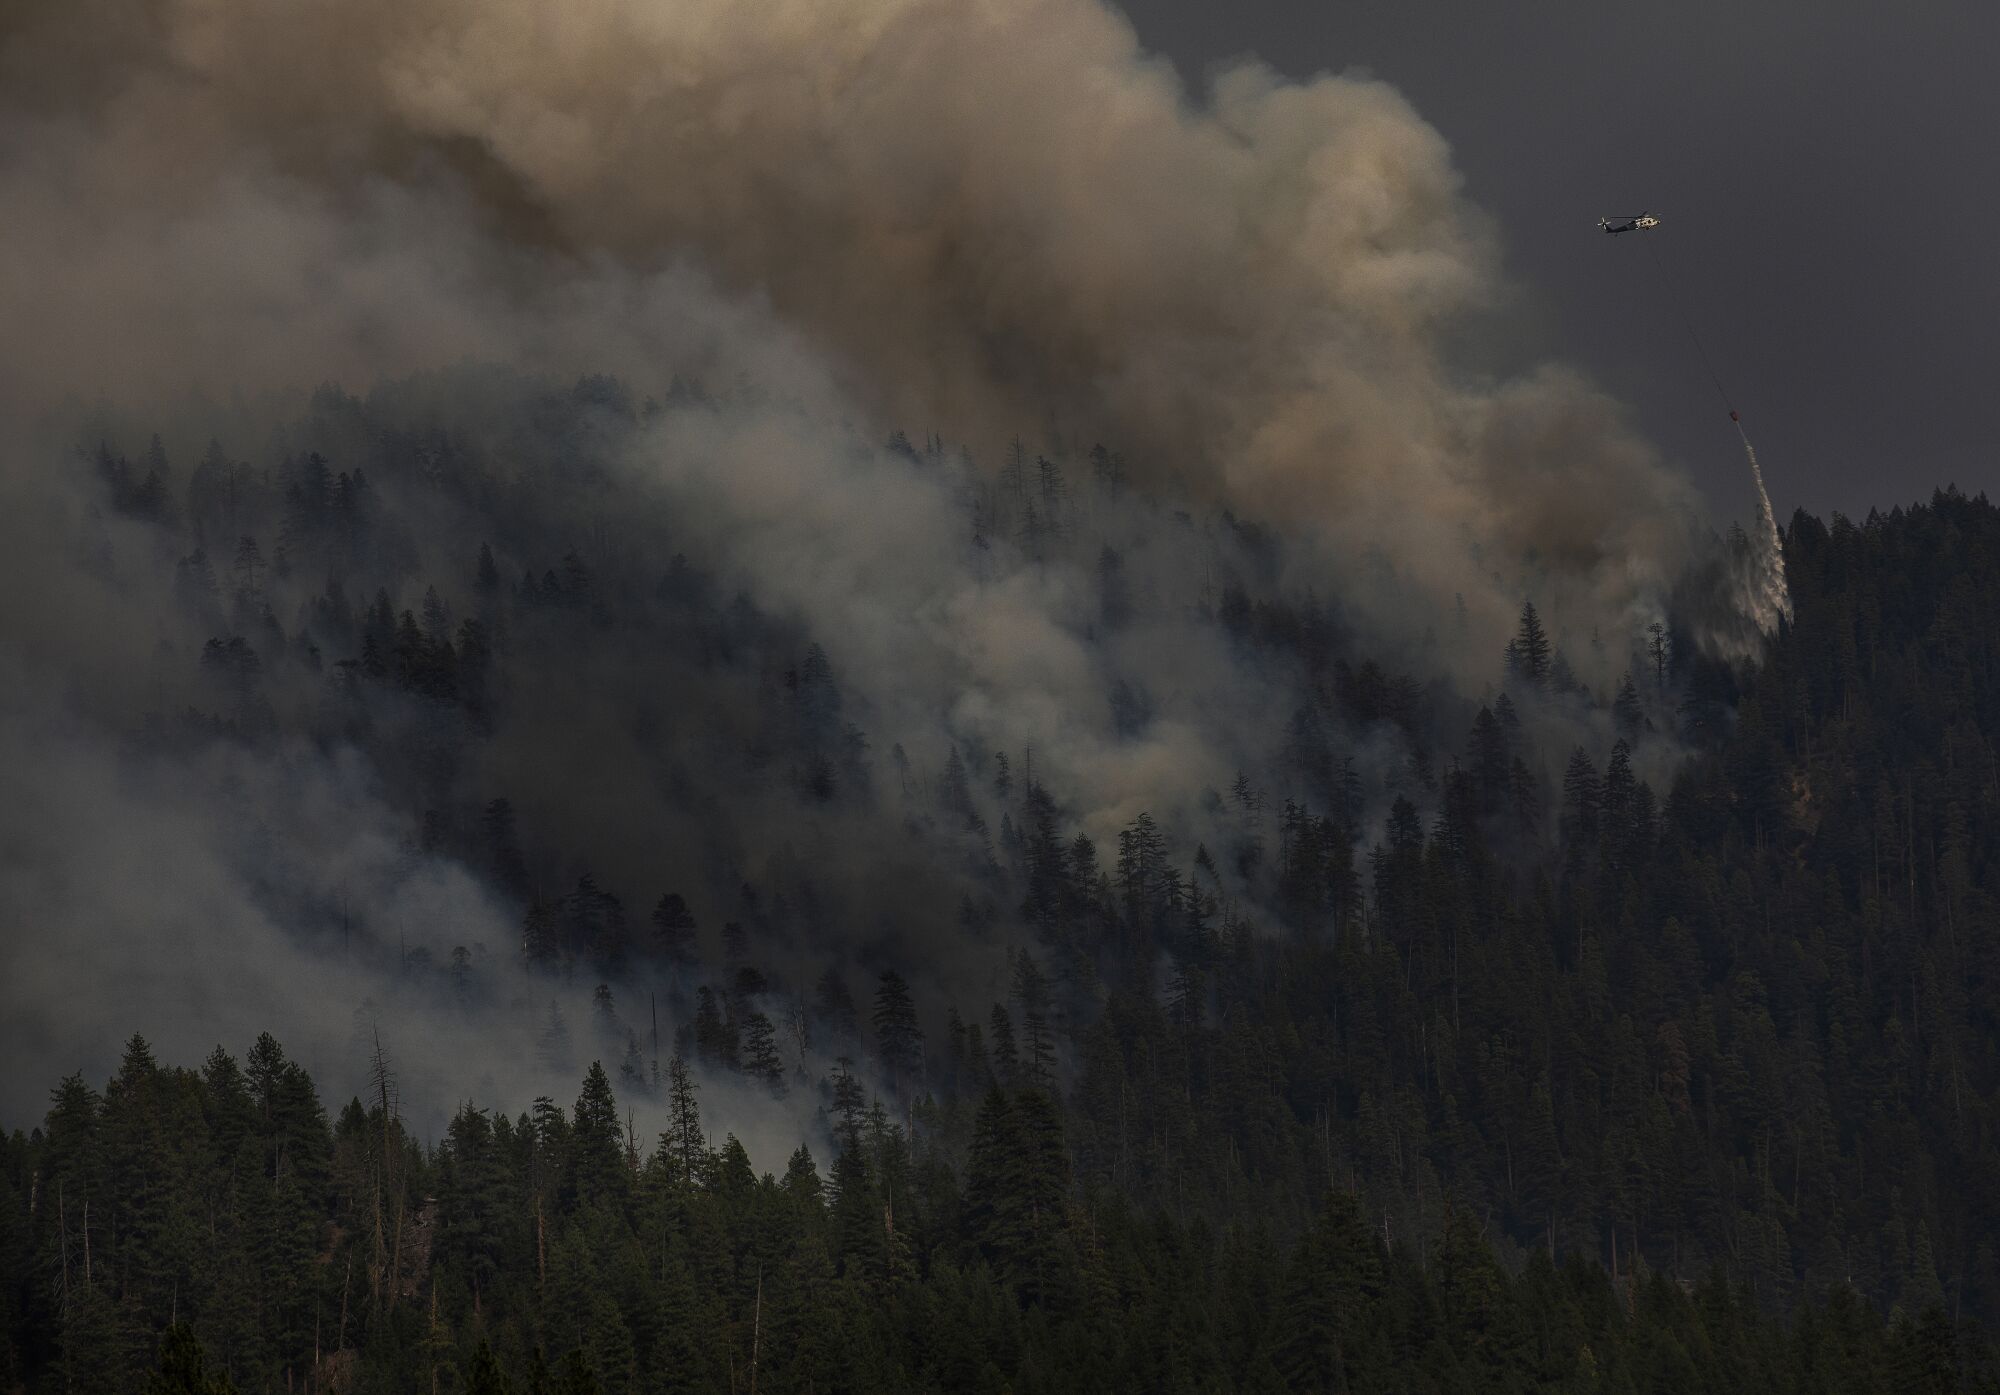 Smoke rises above a forest.